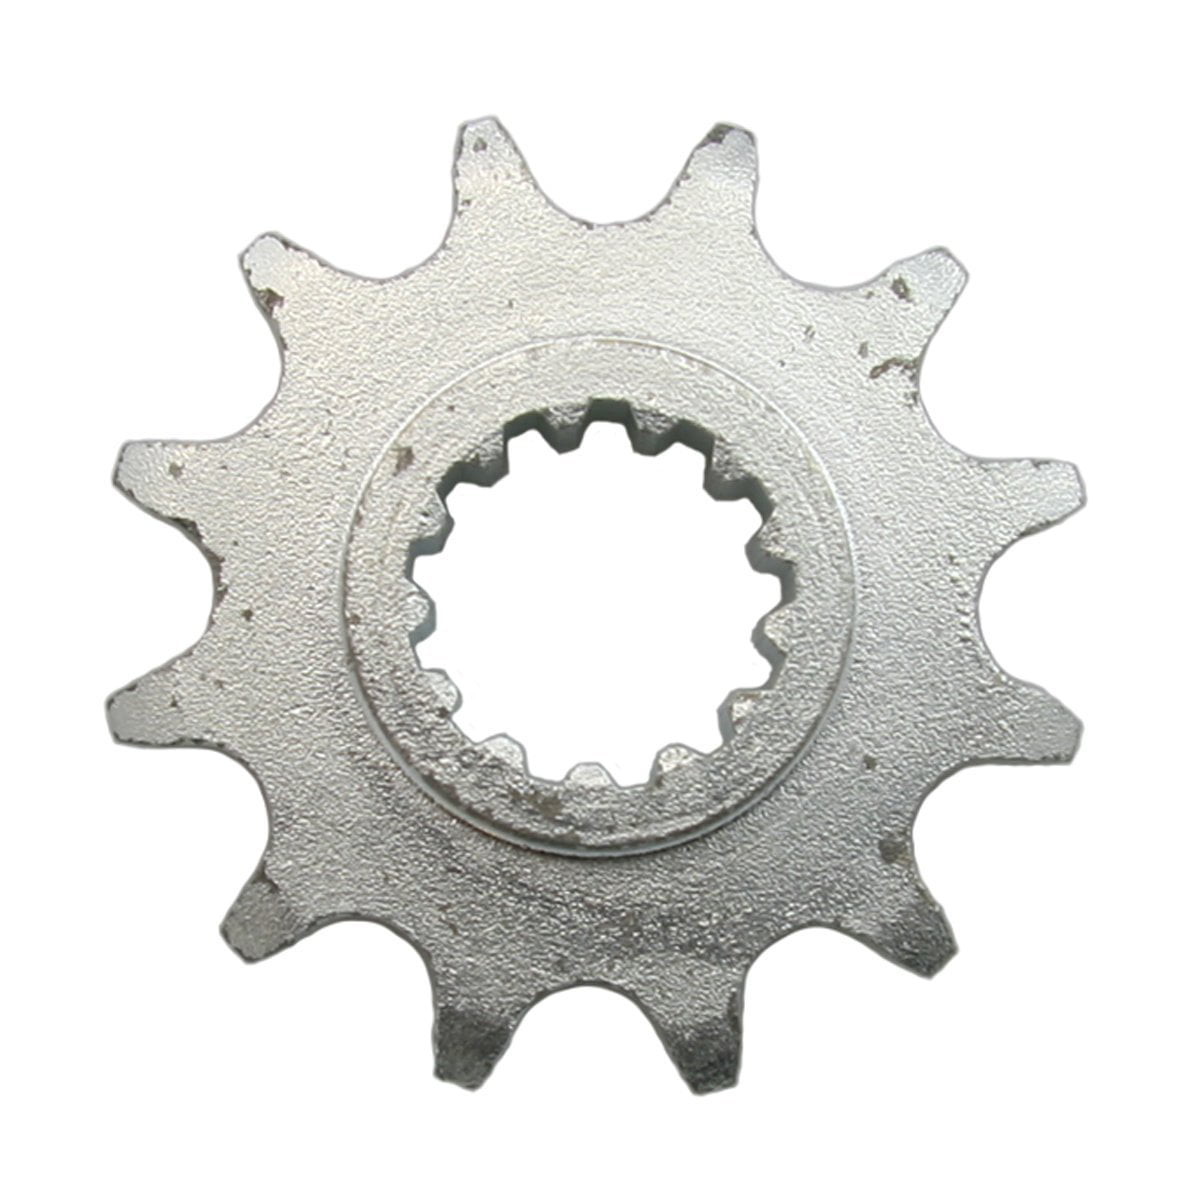 MOJAVE Details about   3 FOR 1       BVP PRO SPORT FRONT SPROCKET 12 TEETH KAWASAKI KLT110 